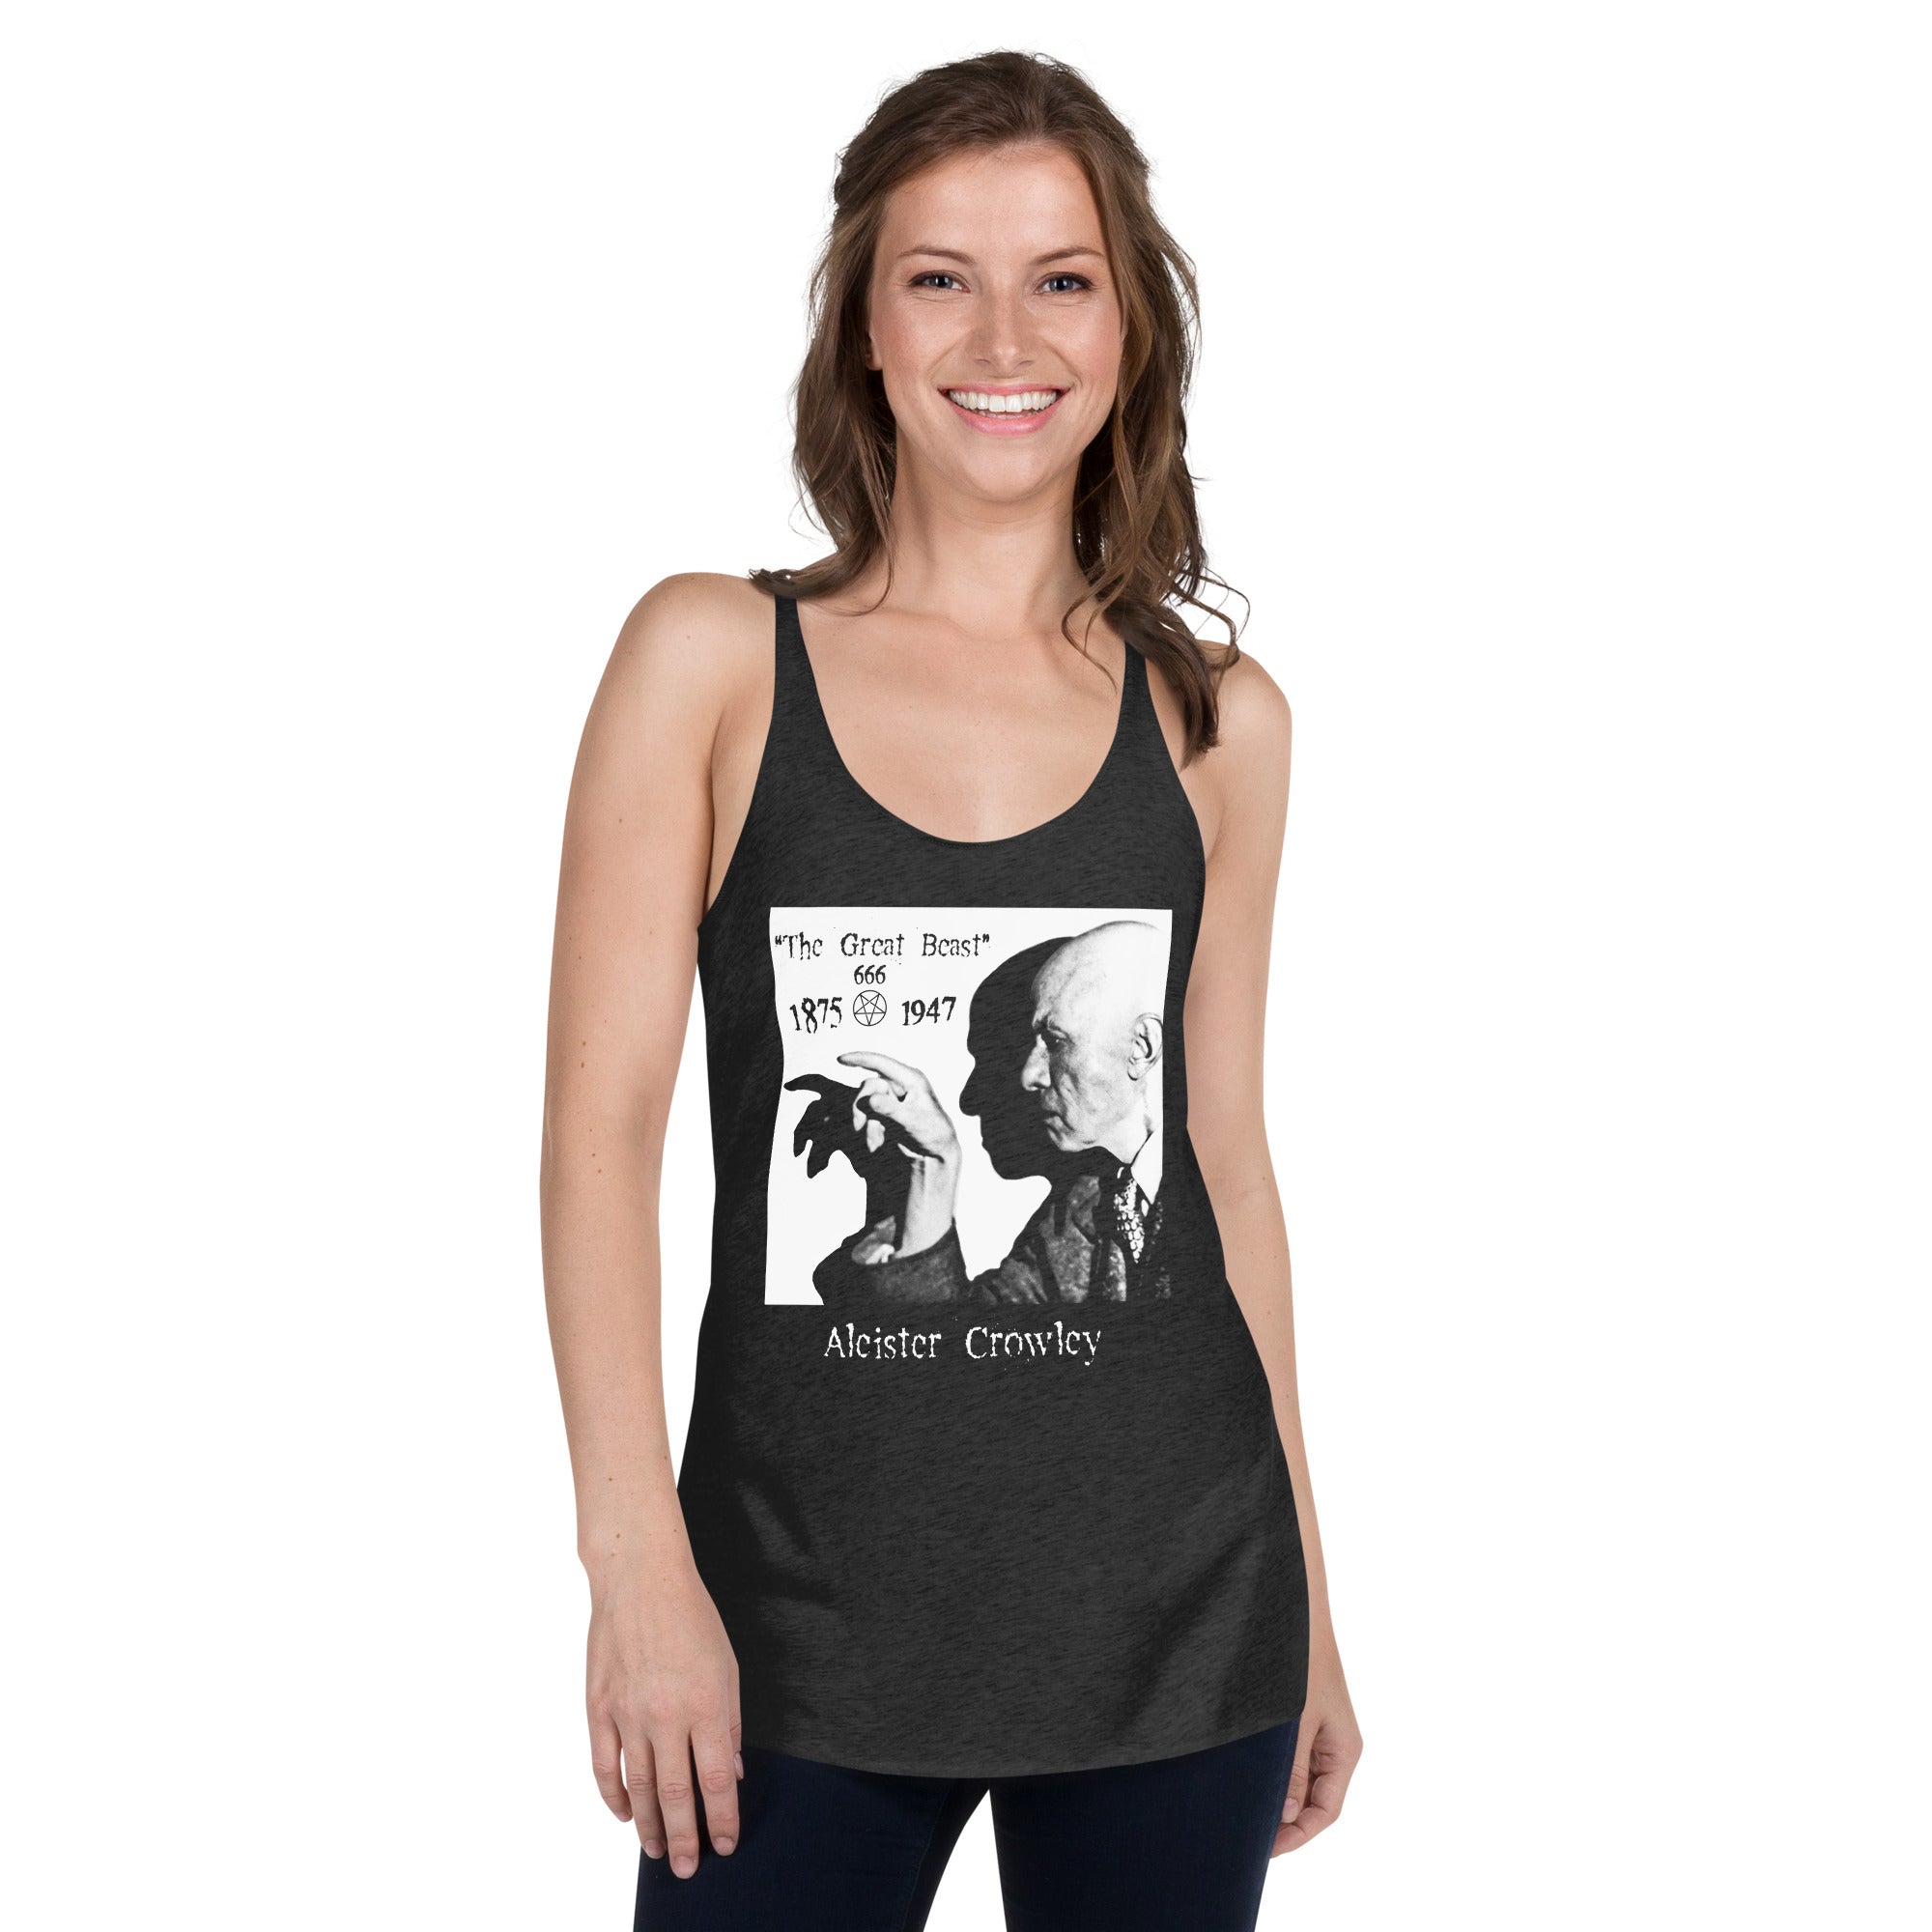 Aleister Crowley Infamous Occult Leader of Thelema Sex Magic Black Women's Racerback Tank - Edge of Life Designs